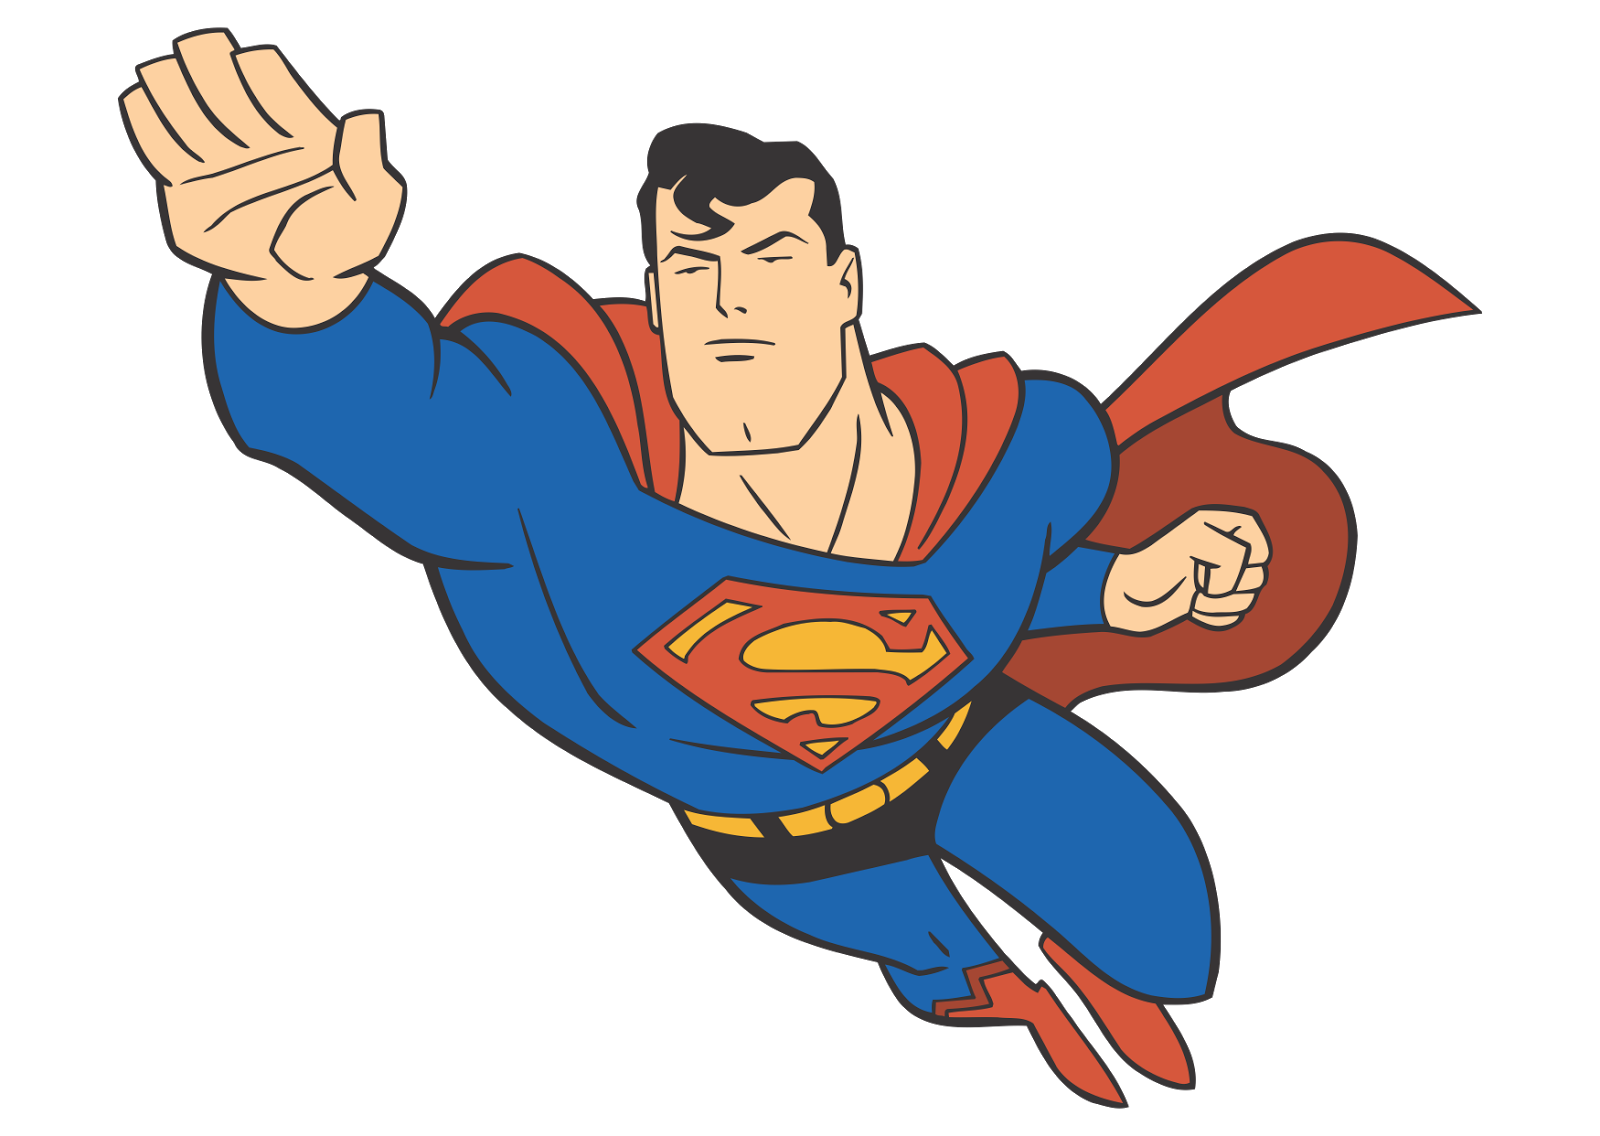 Superman Cartoon PNG Transparent Background, Free Download #31579 -  FreeIconsPNG